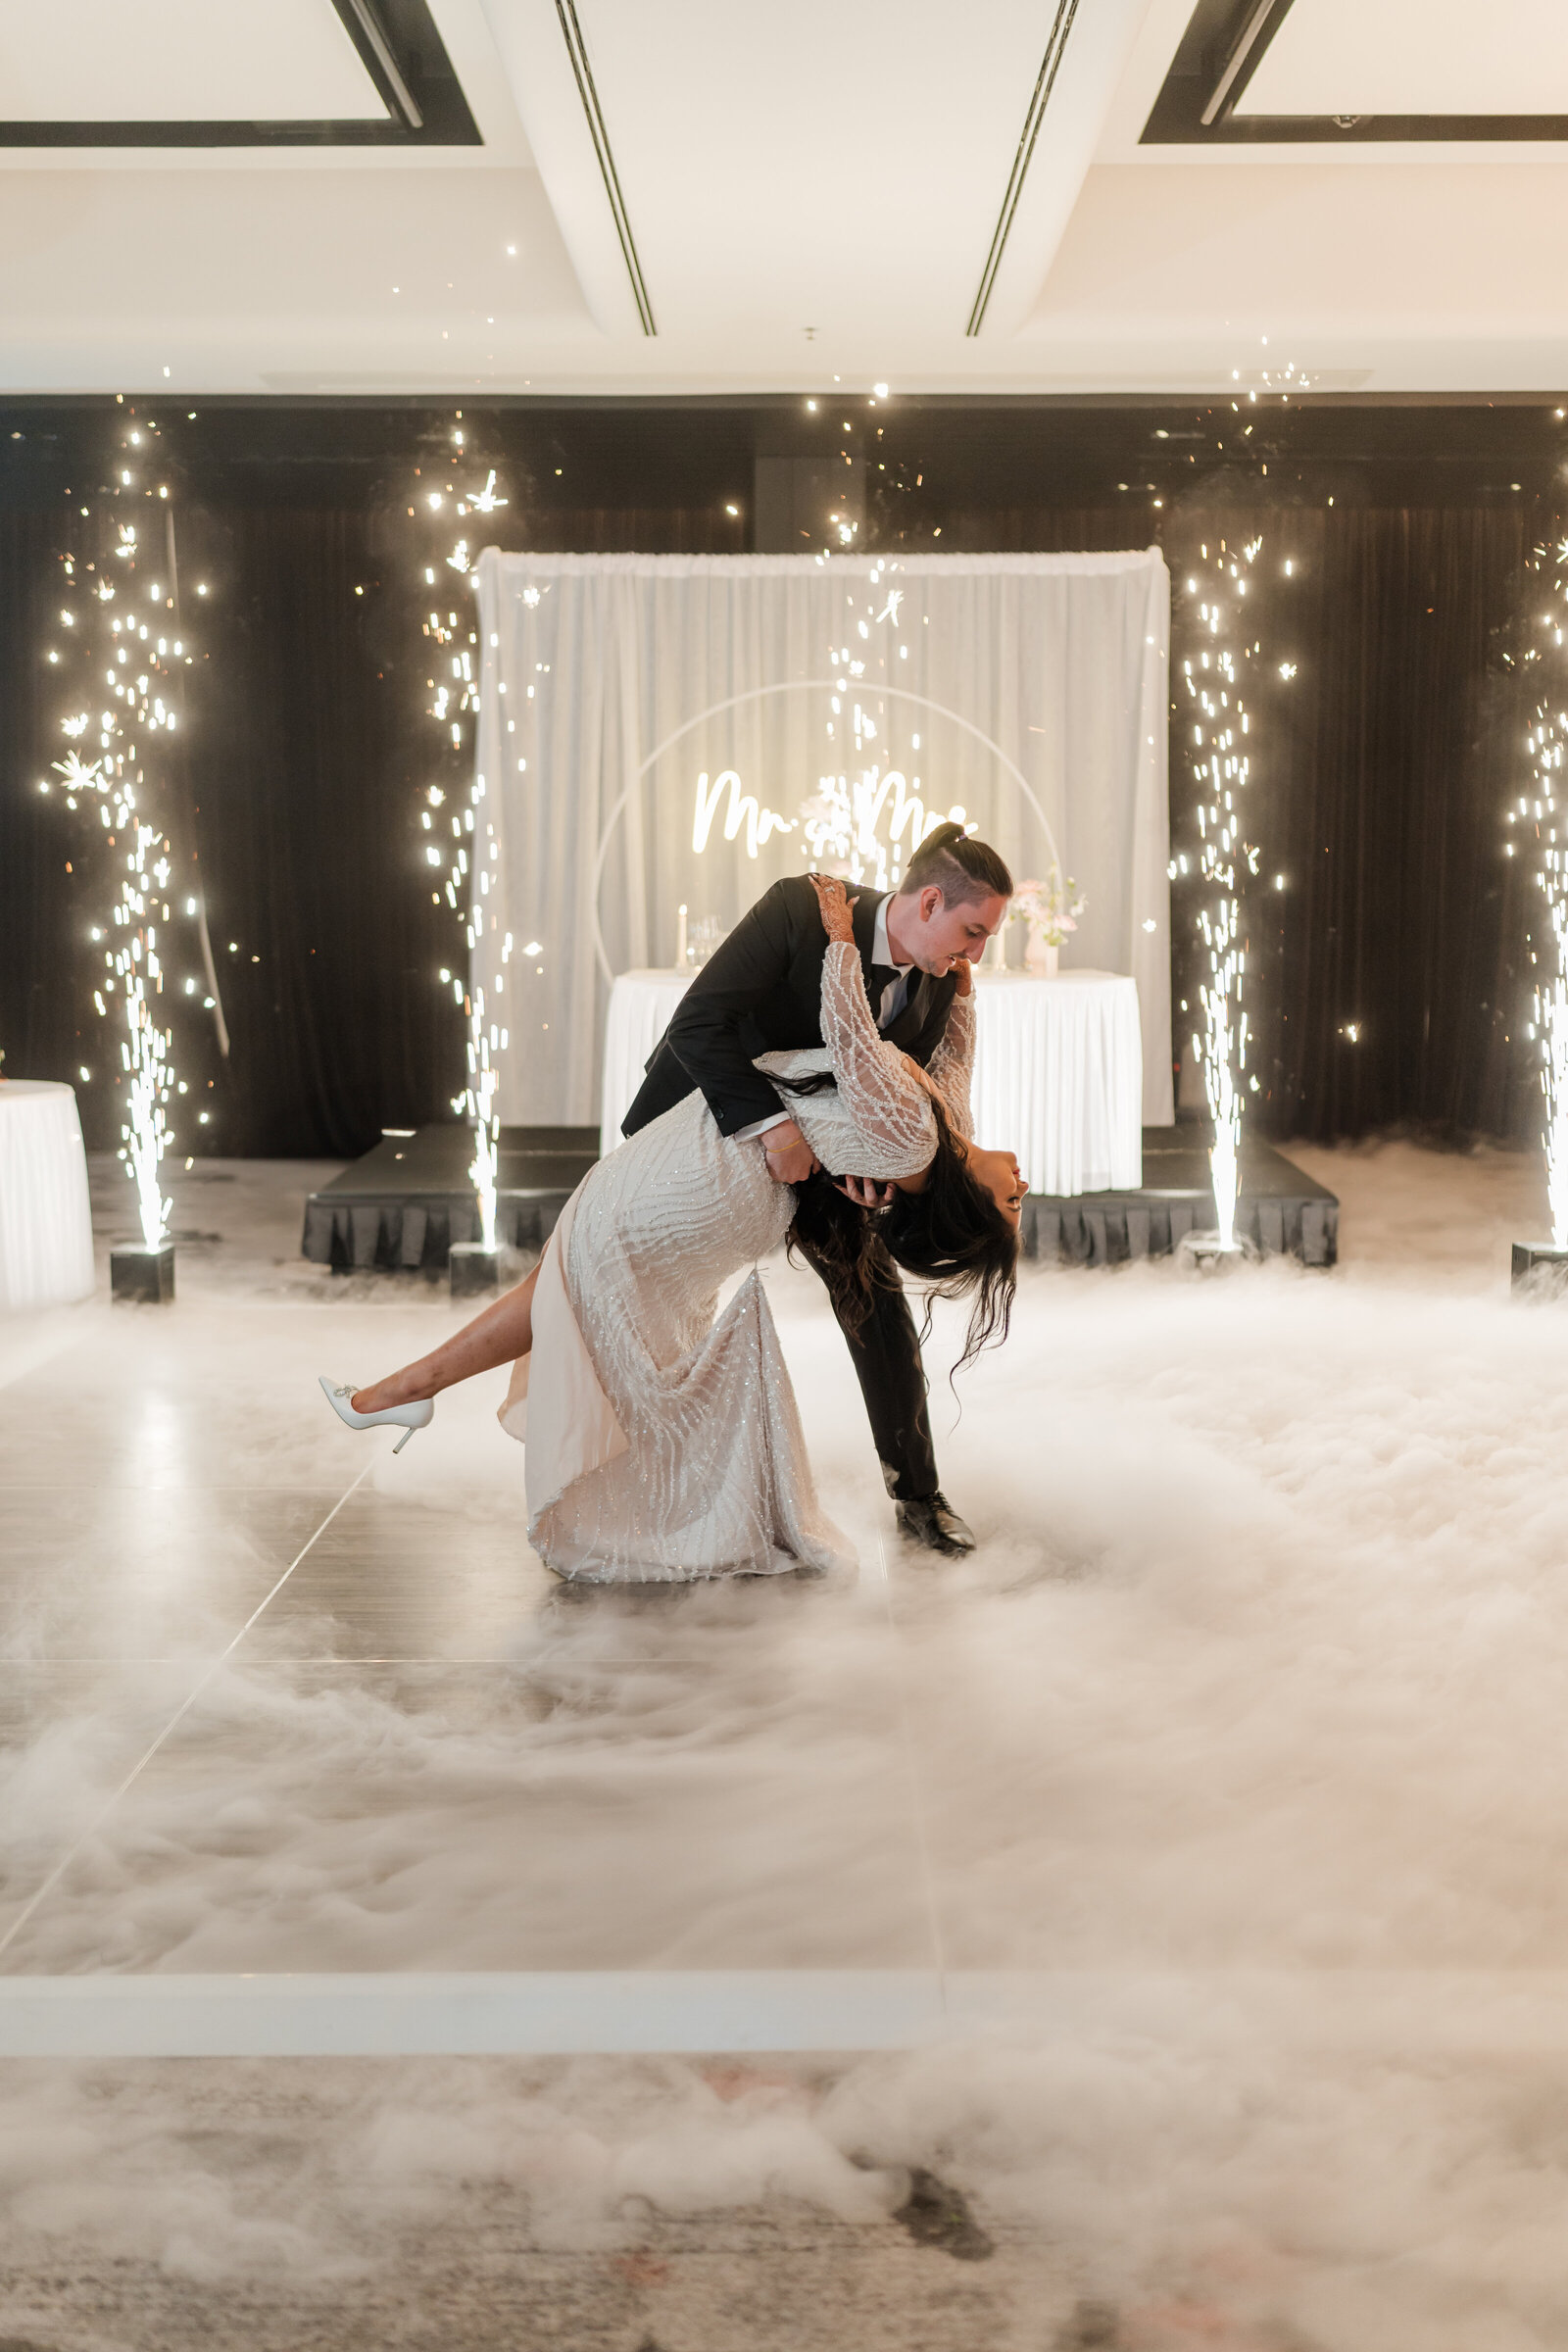 Wedding dance with cold sparklers and dry ice